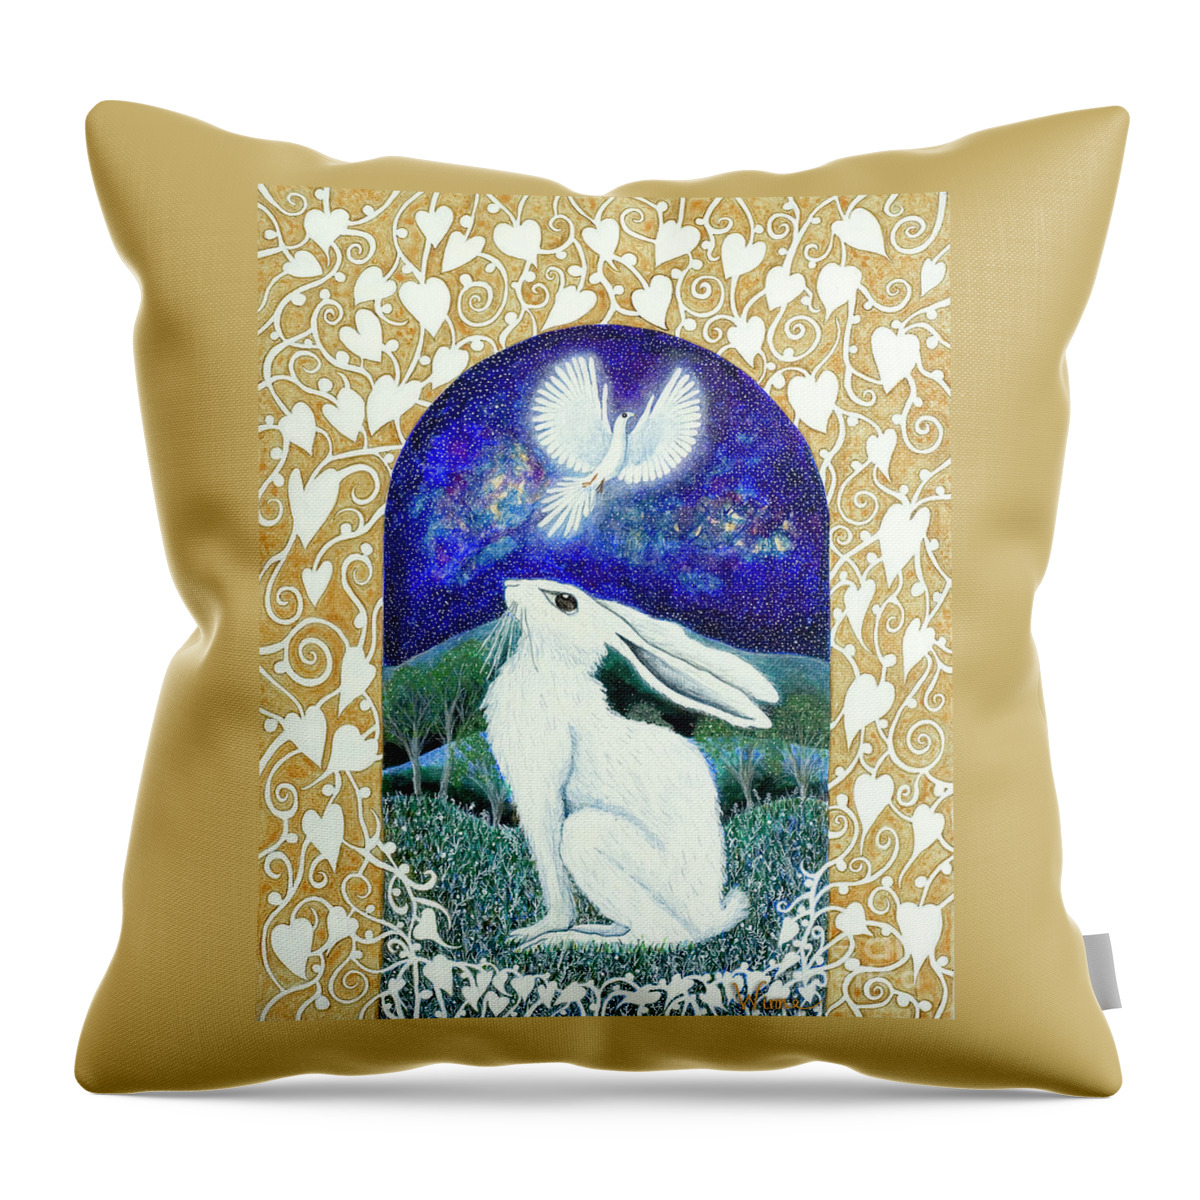 Lise Winne Throw Pillow featuring the painting A Deep Thought by Lise Winne